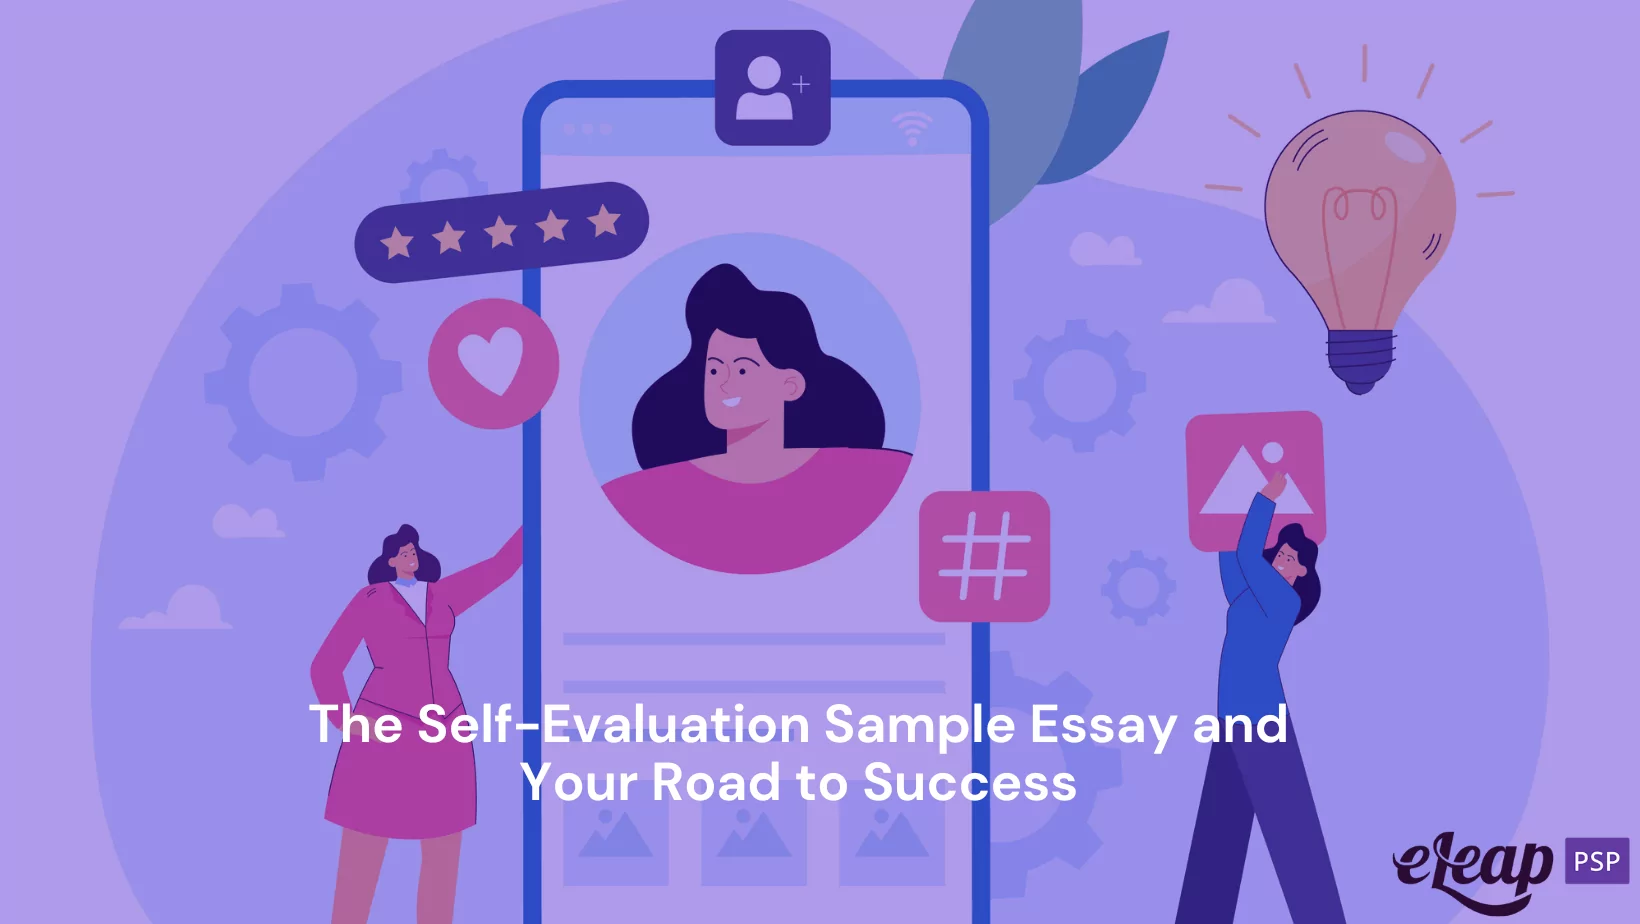 The Self-Evaluation Sample Essay and Your Road to Success